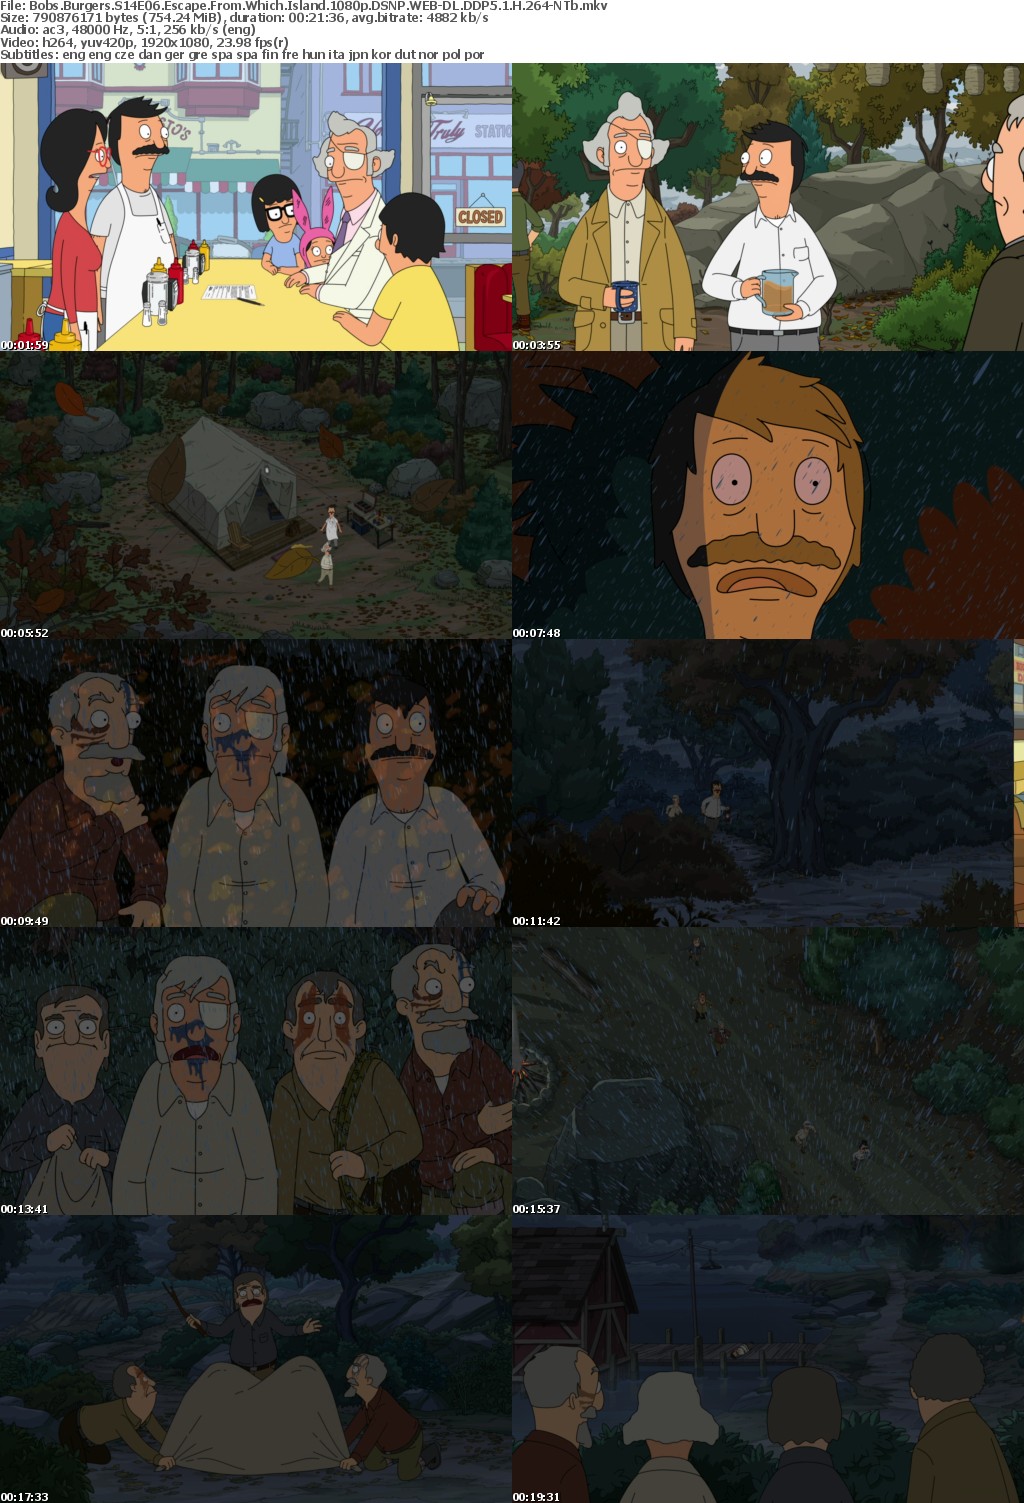 Bobs Burgers S14E06 Escape From Which Island 1080p DSNP WEB-DL DDP5 1 H 264-NTb